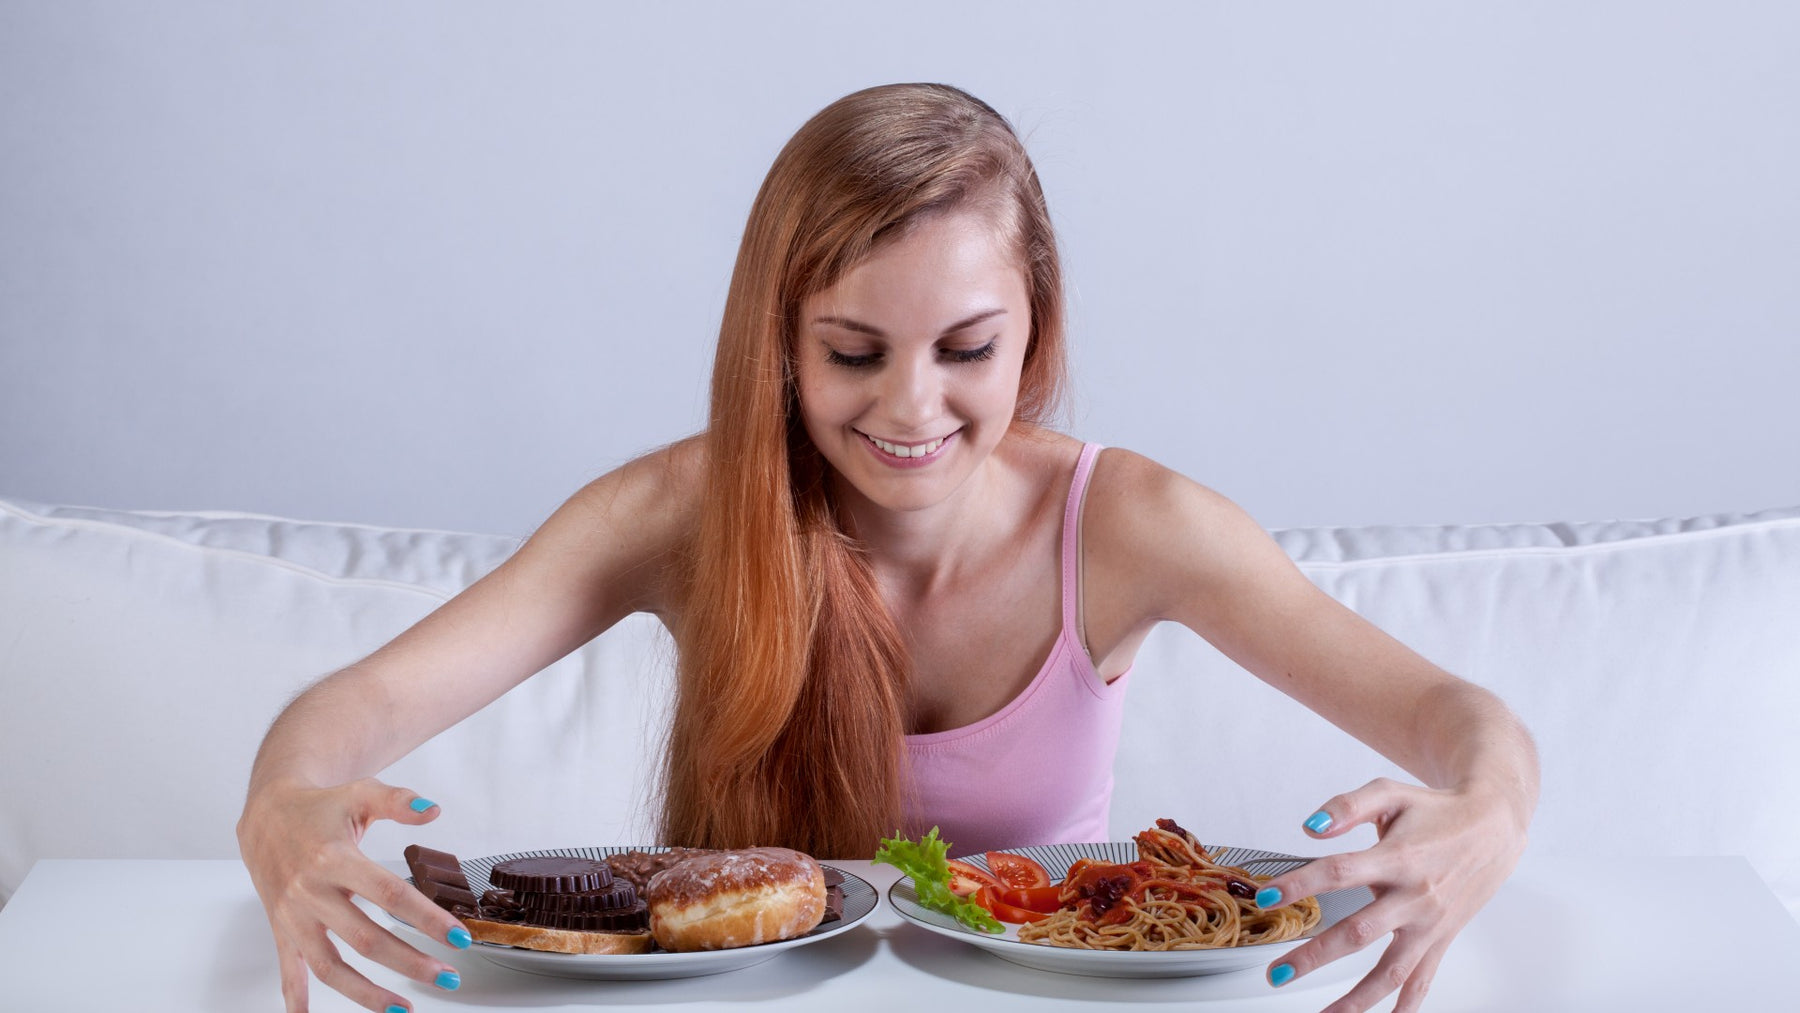 6 Strategies That Can Help the Binge Eater